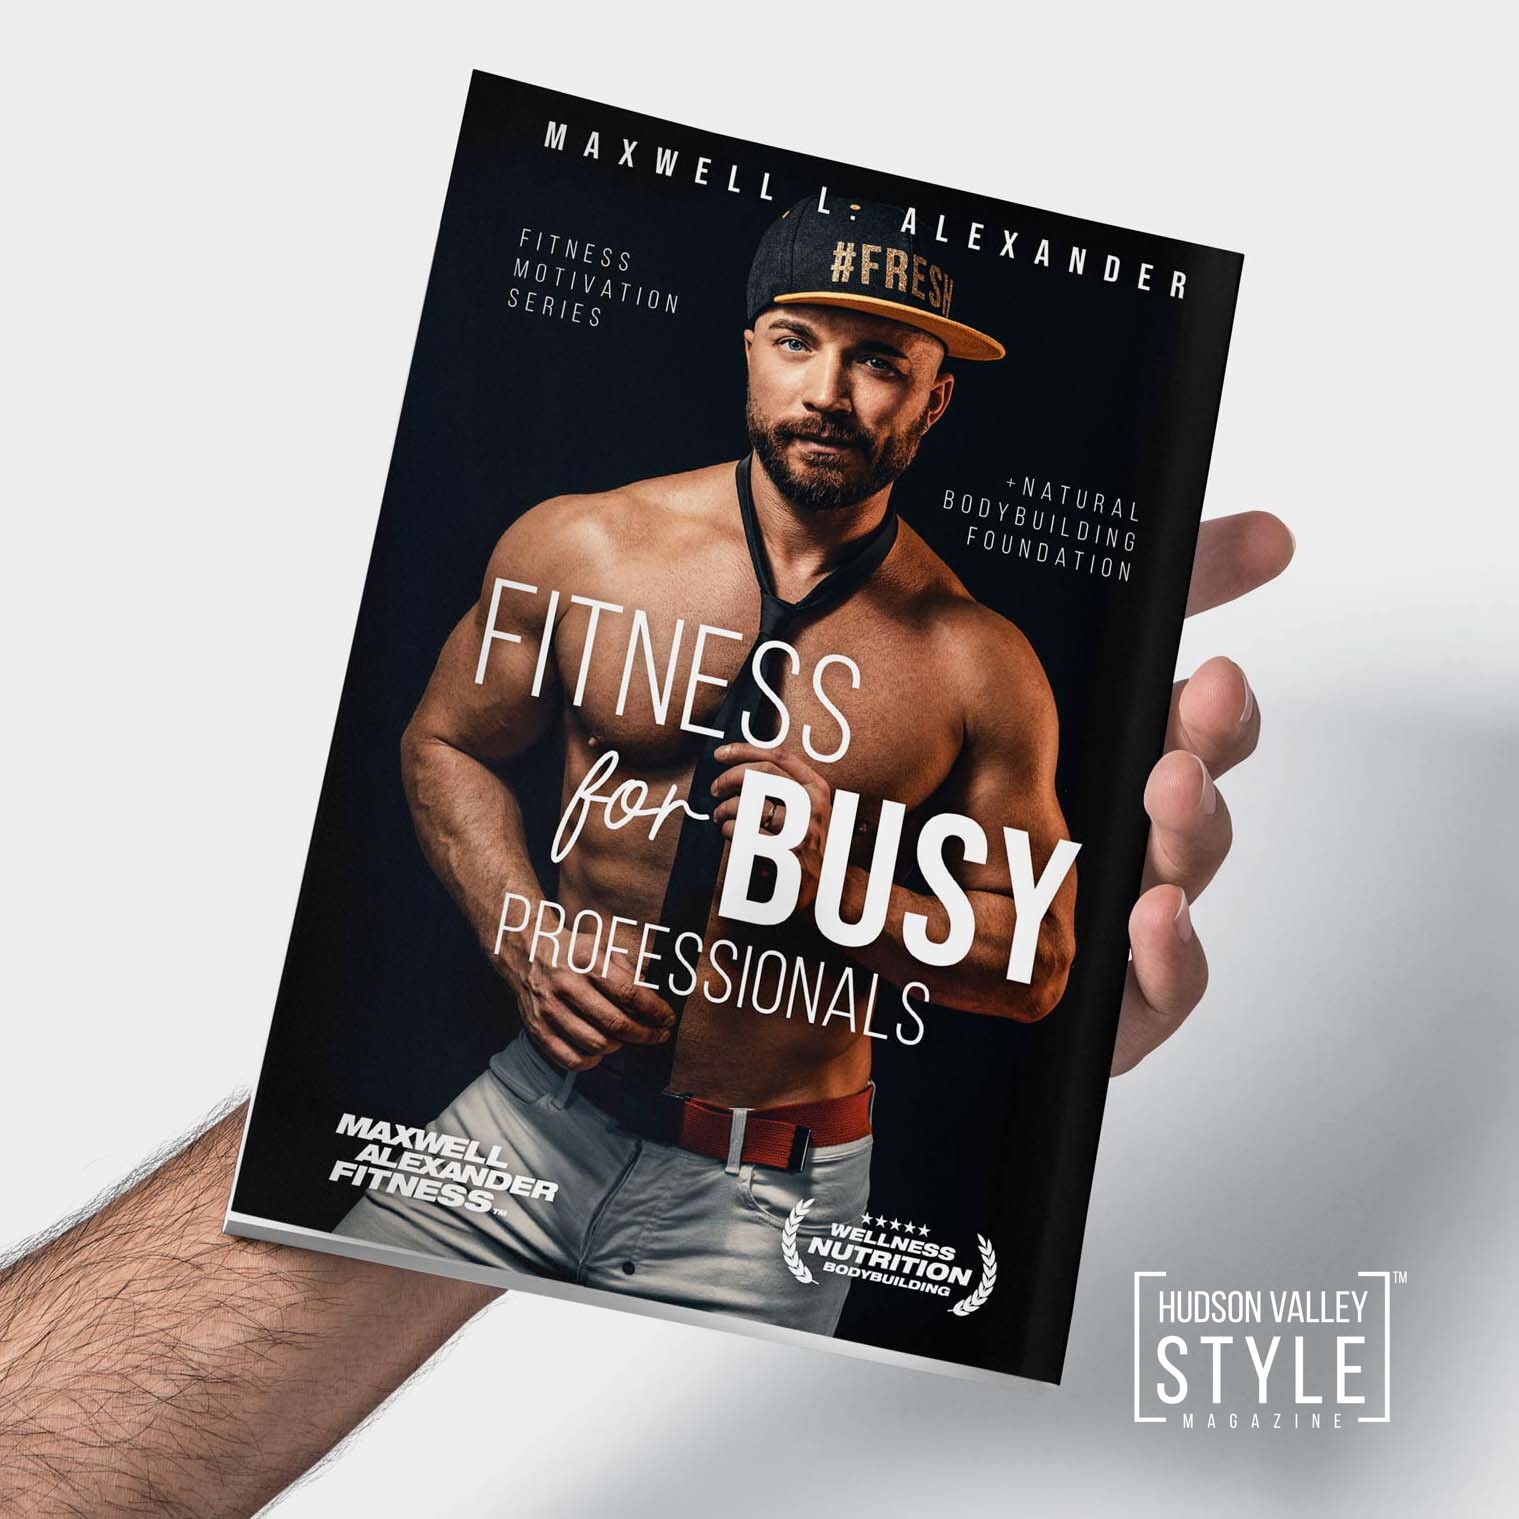 Fitness for Busy Professionals – New Book by Certified Elite Fitness Trainer and Bodybuilding Coach Maxwell Alexander